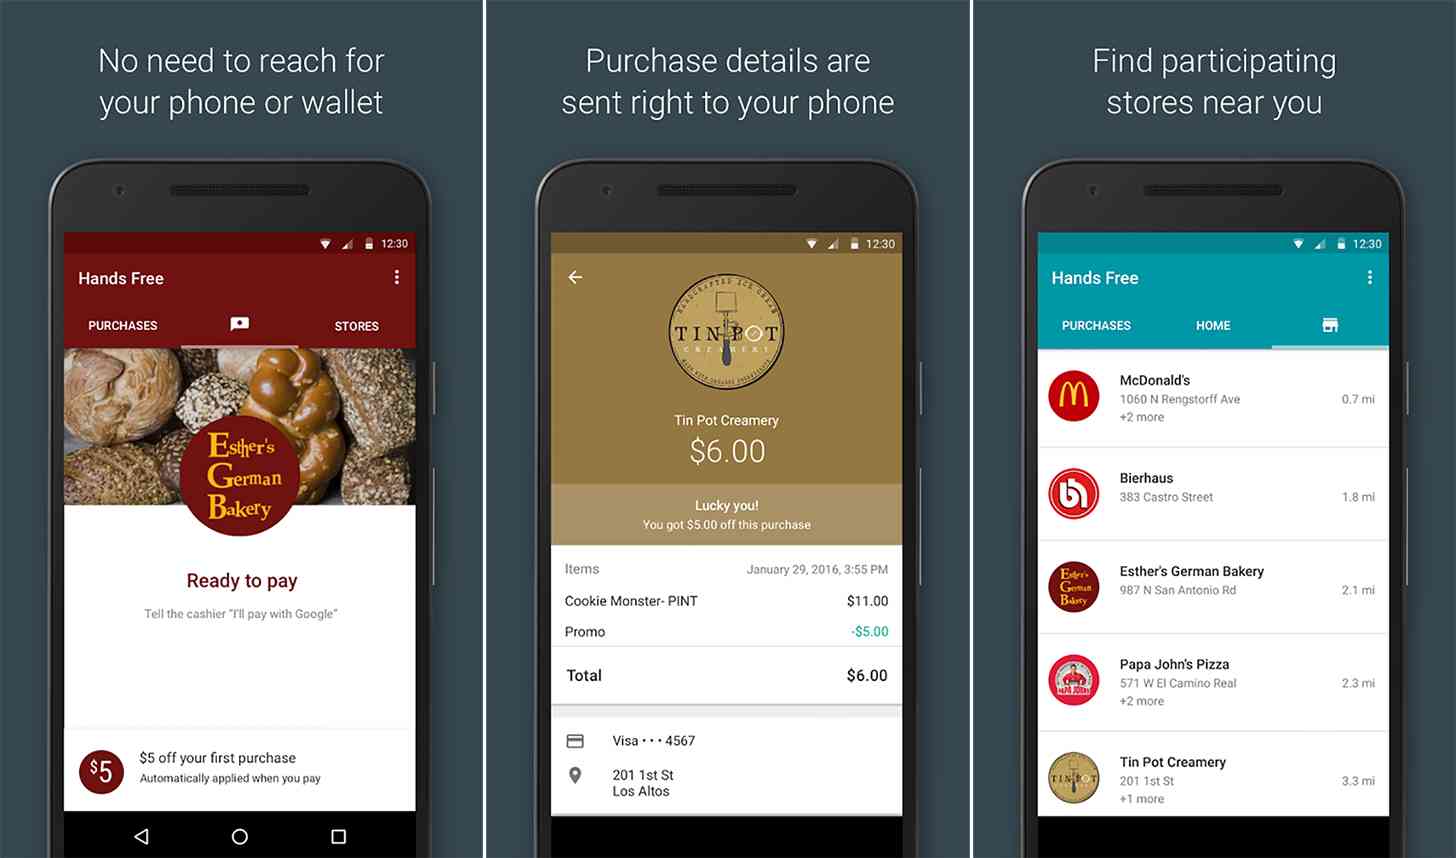 Google hands-free payment App is much more advanced form of payment option